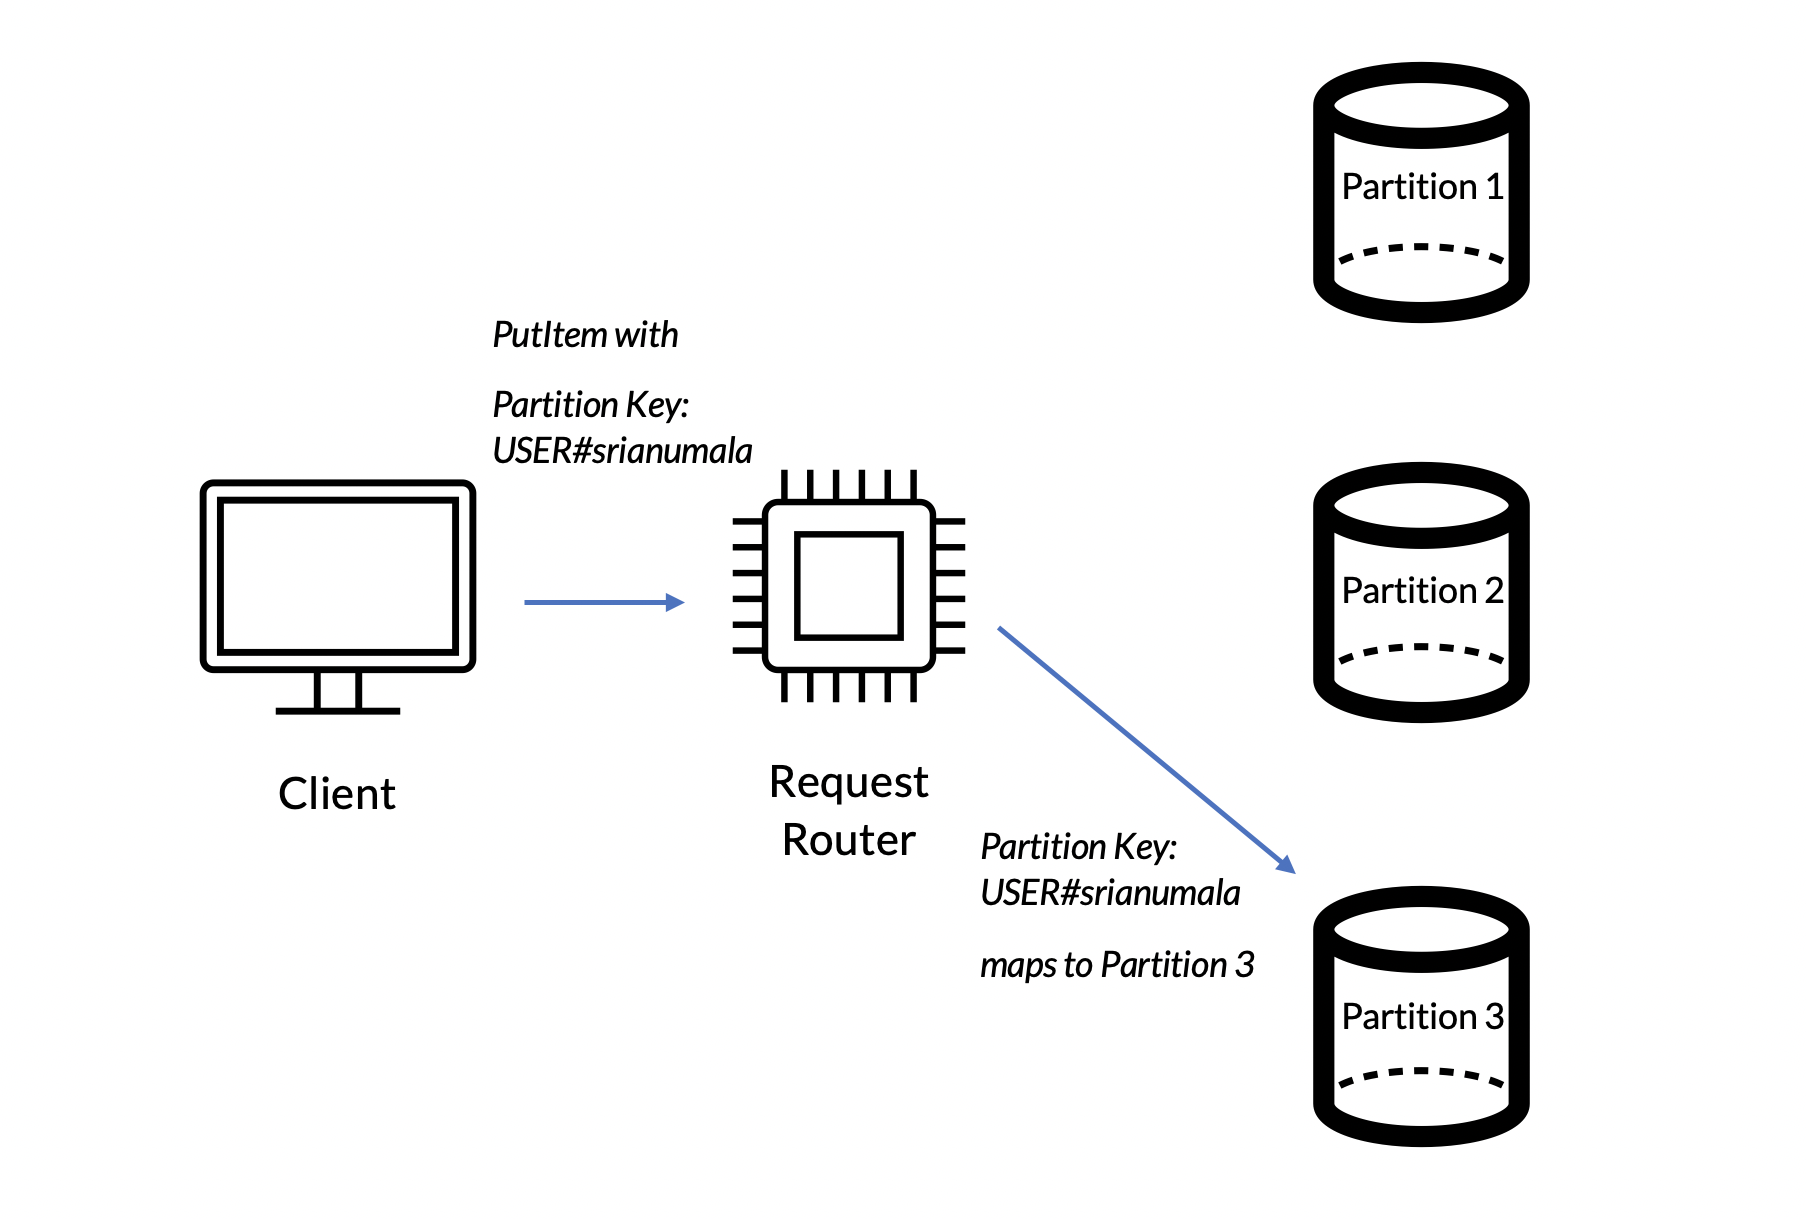 Horizontal partitioning and load balancing in NoSQL